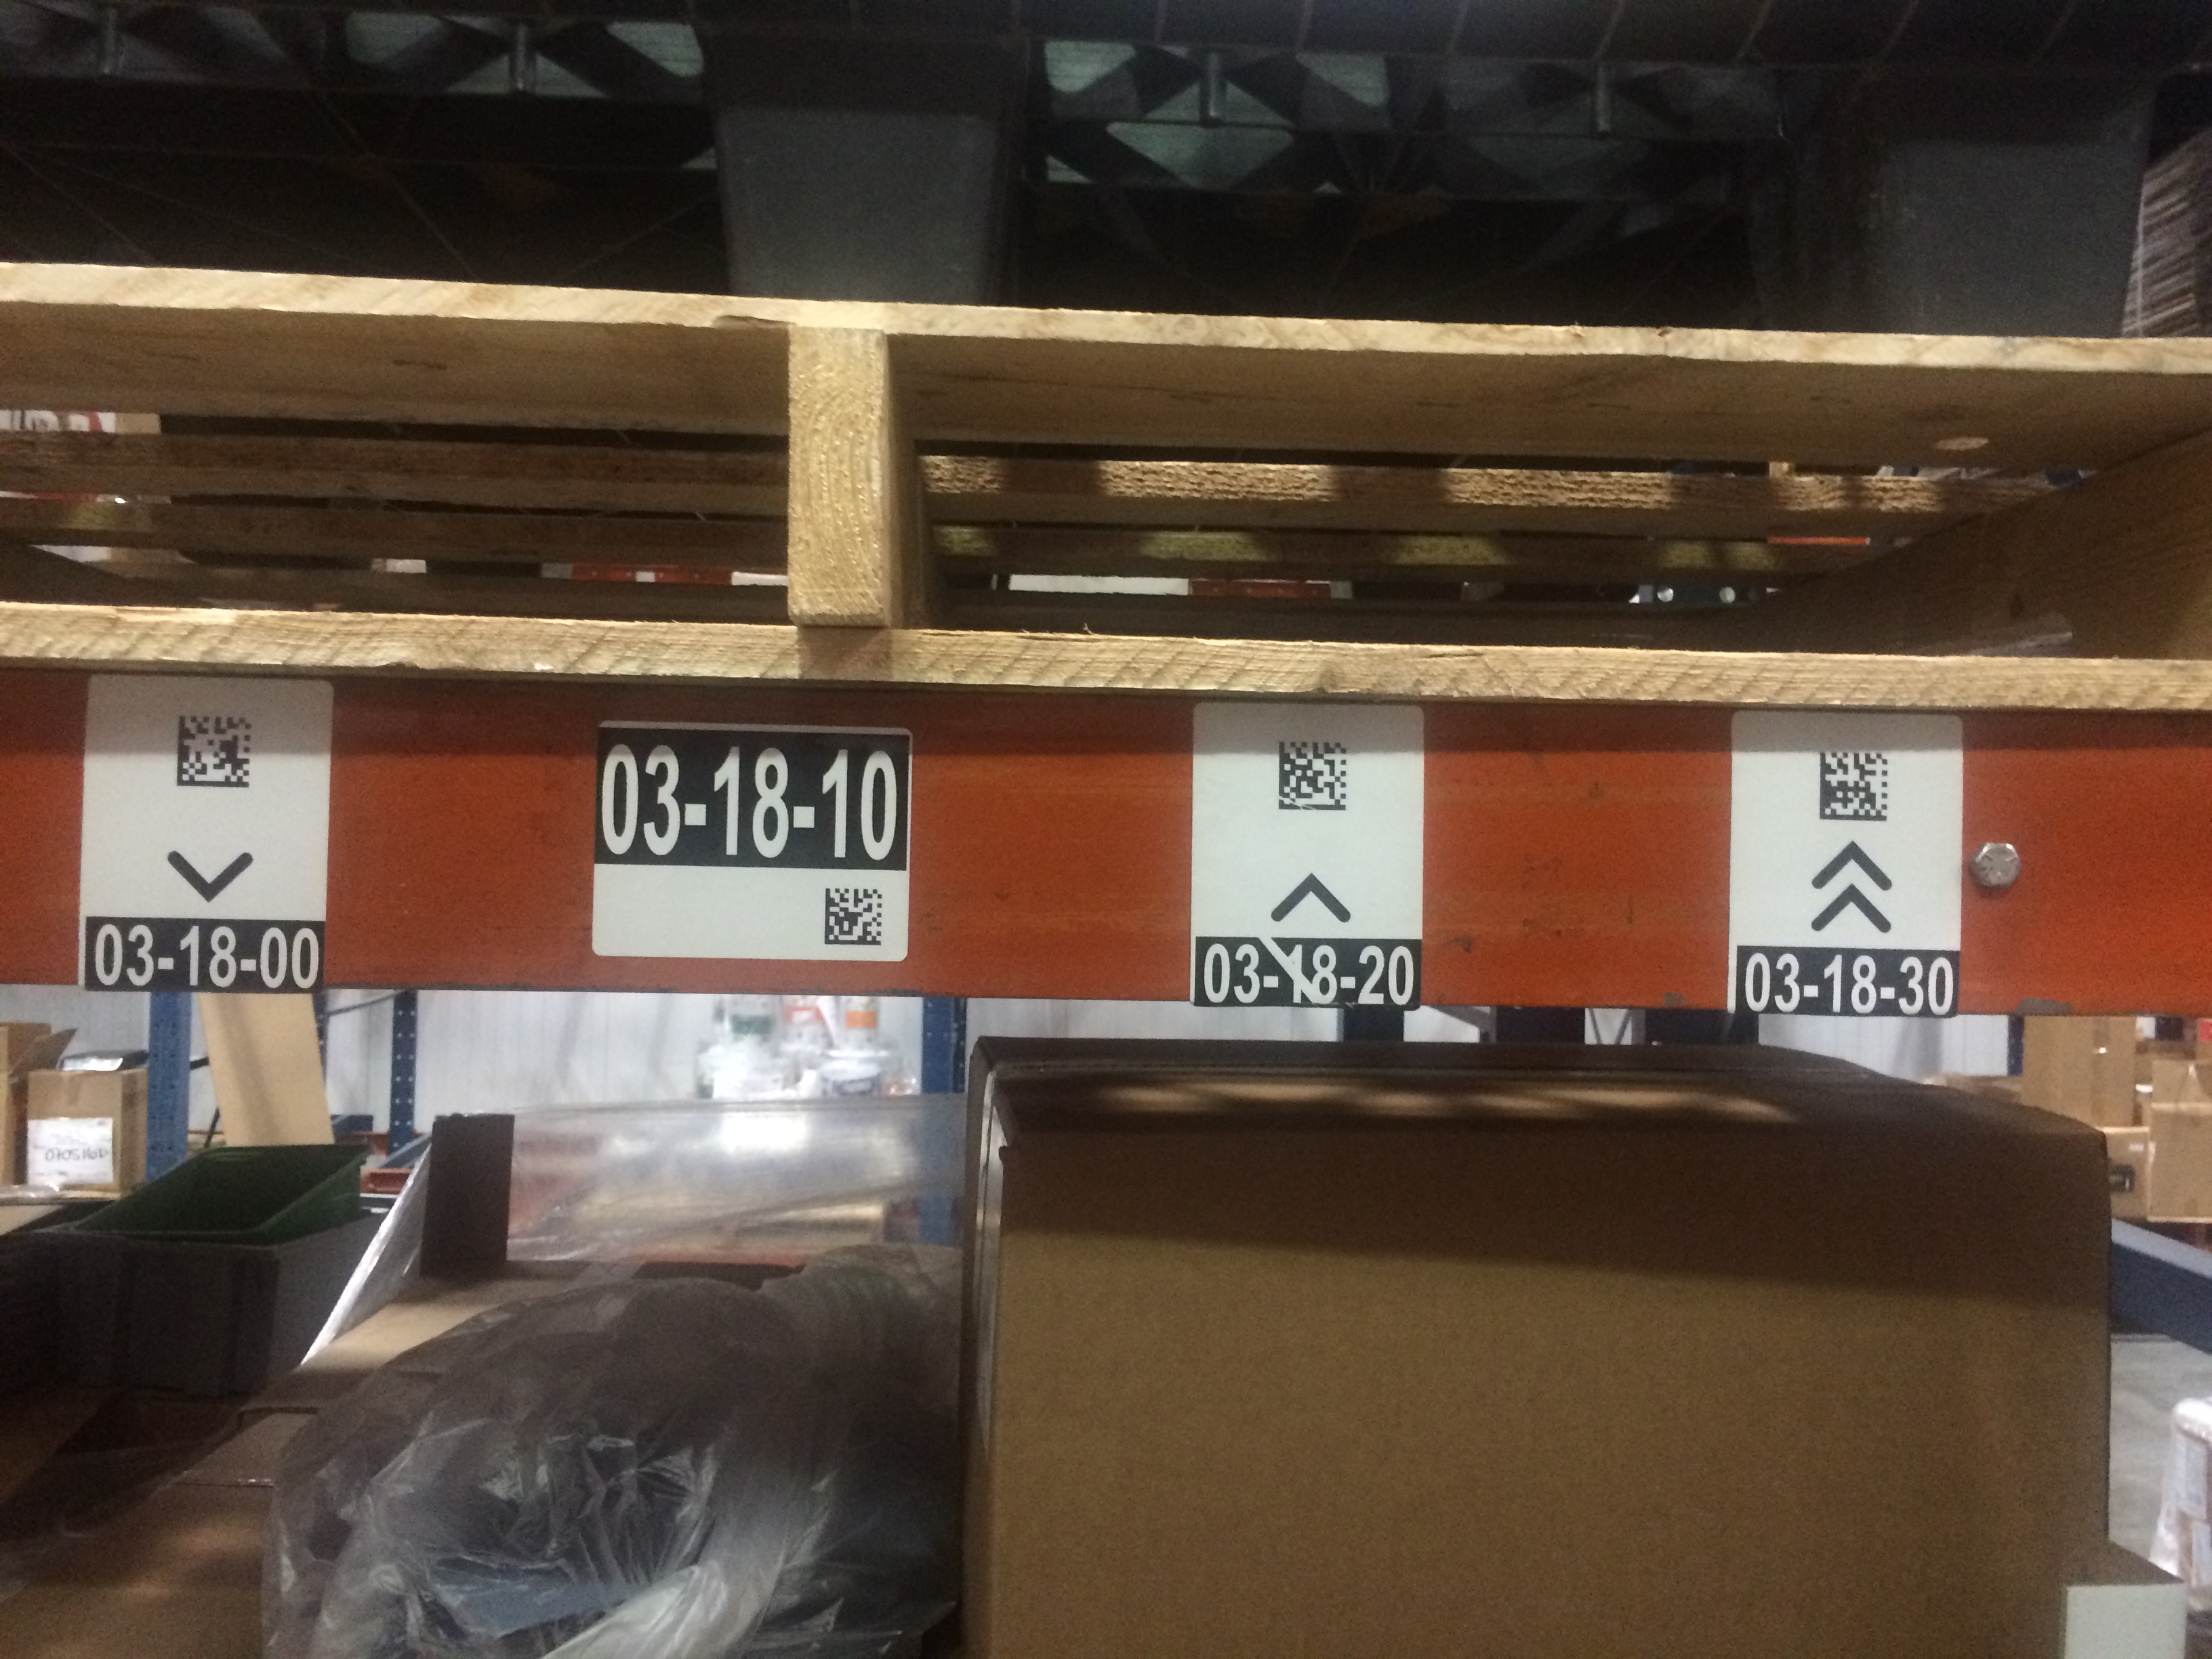 Example warehouse pallet bin location labels